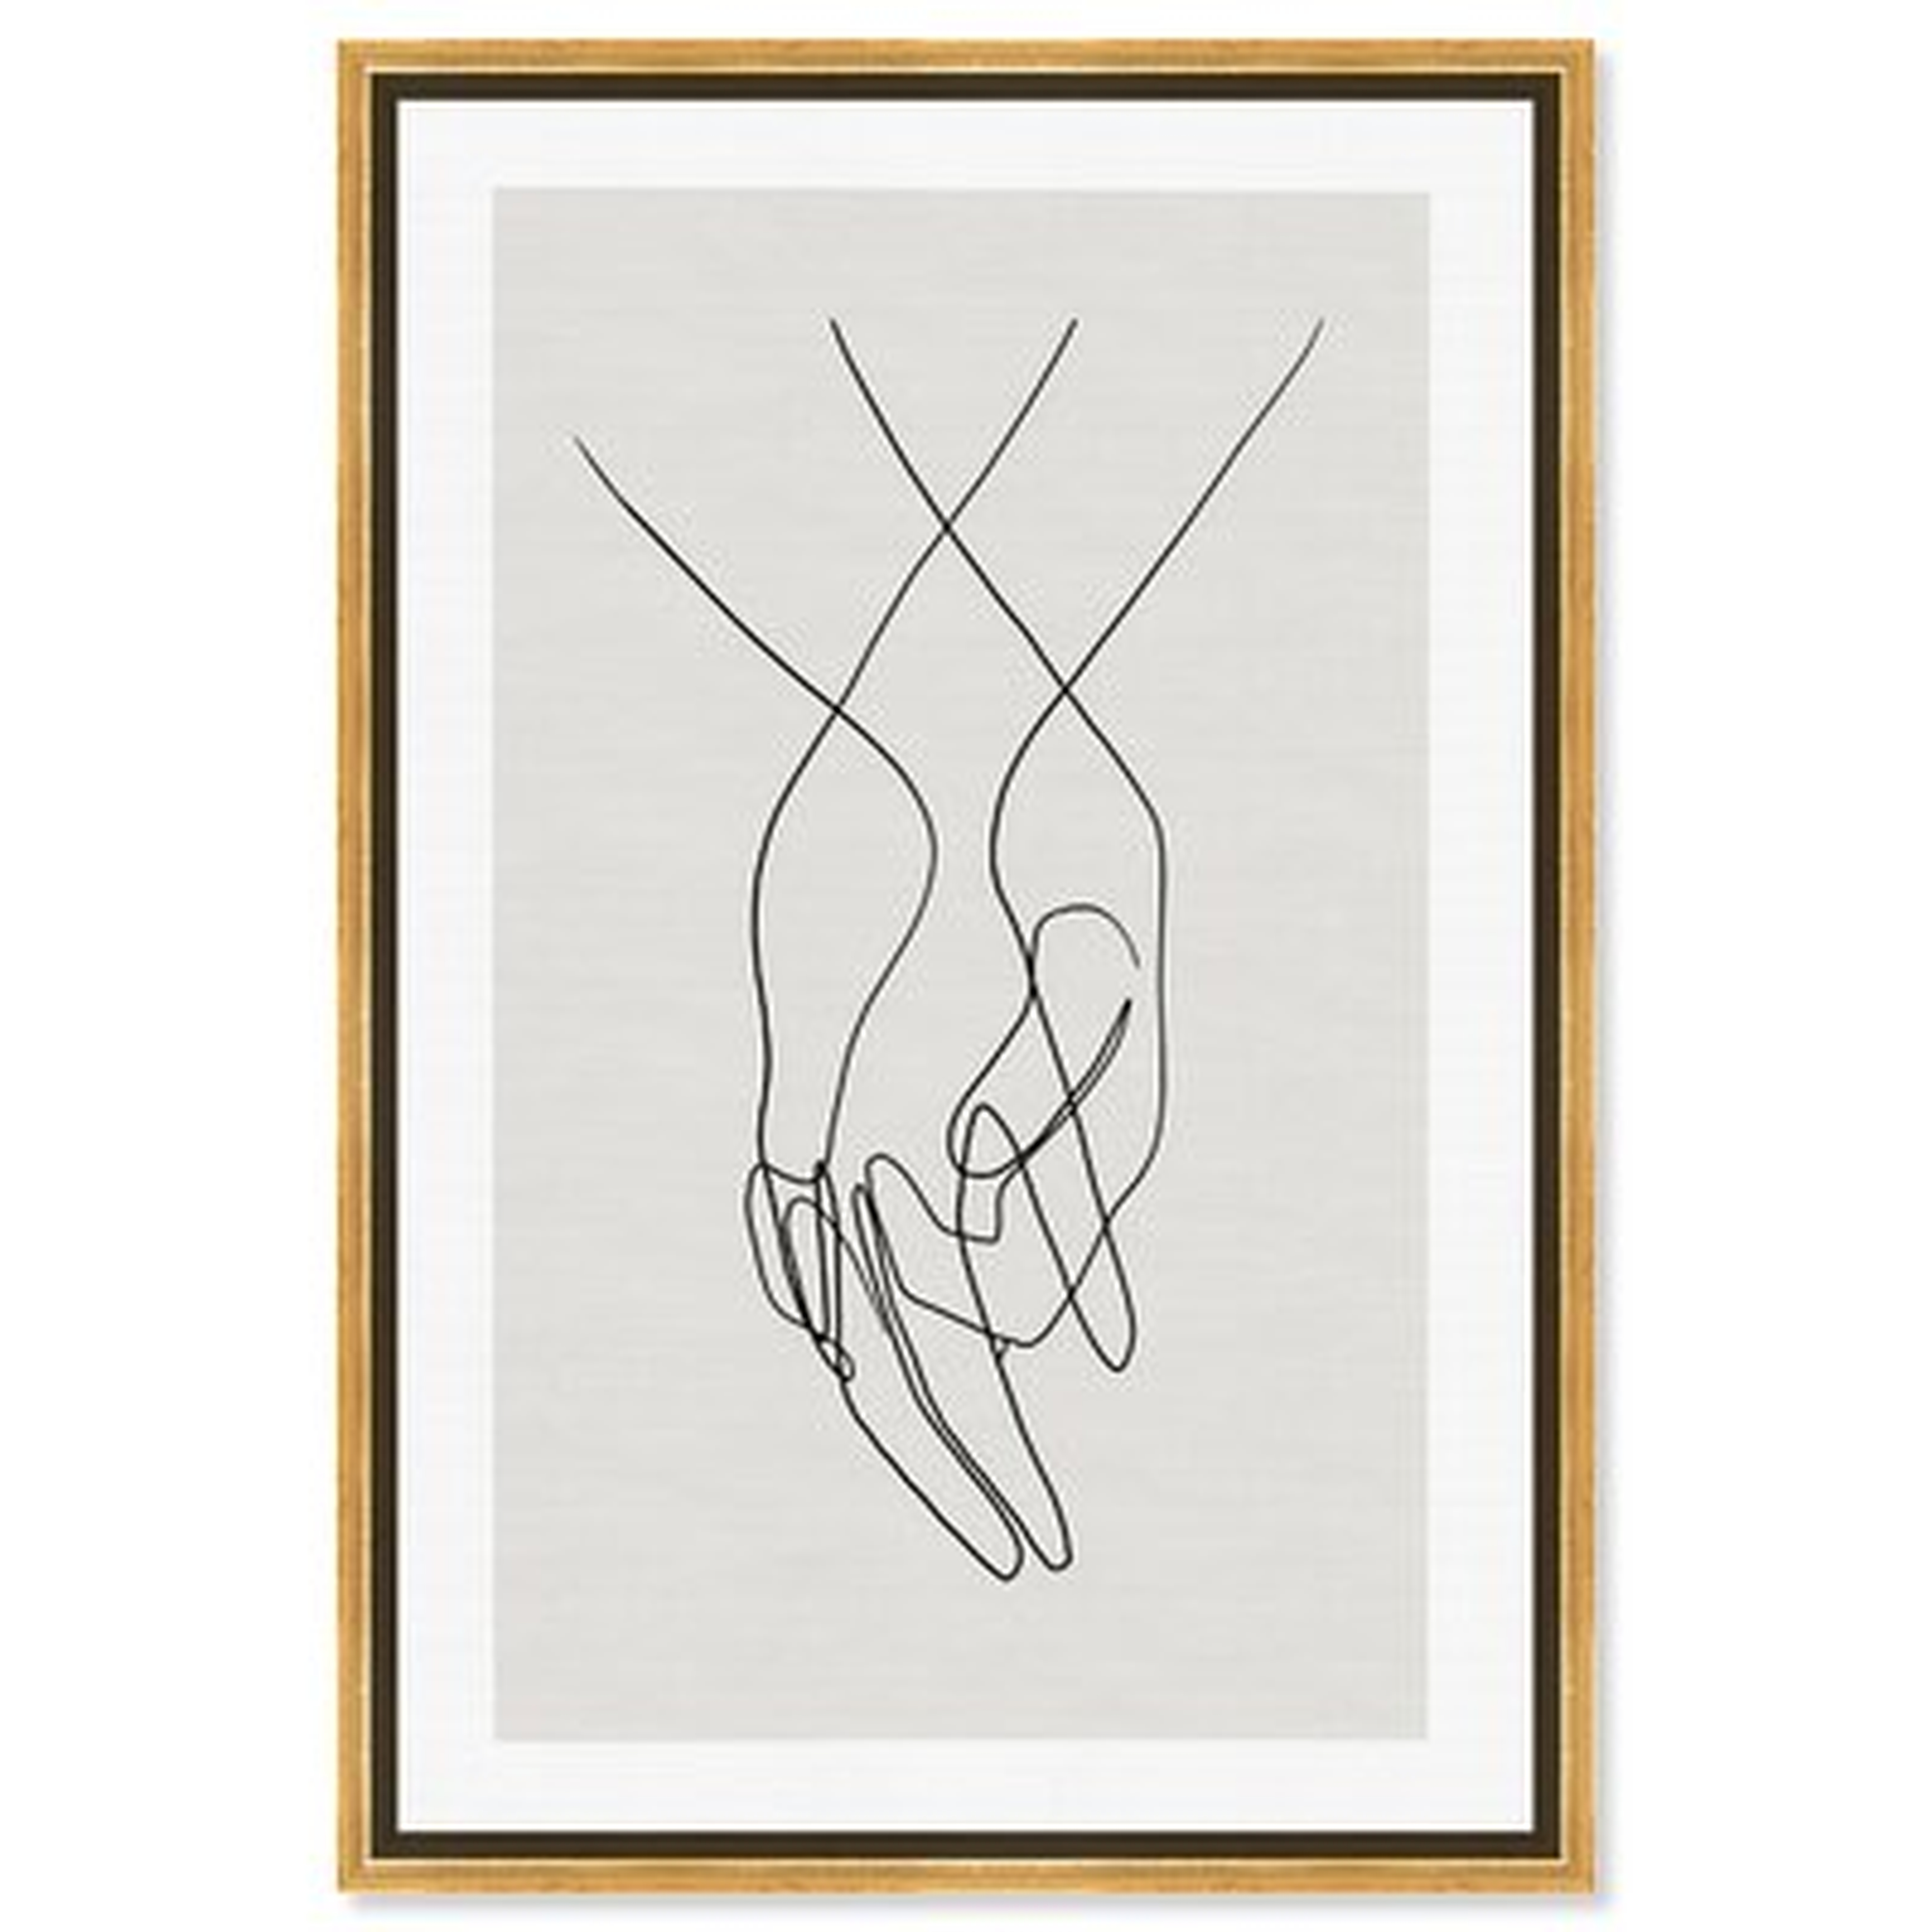 People and Portraits Hands Shapes - Painting Print on Canvas - Wayfair